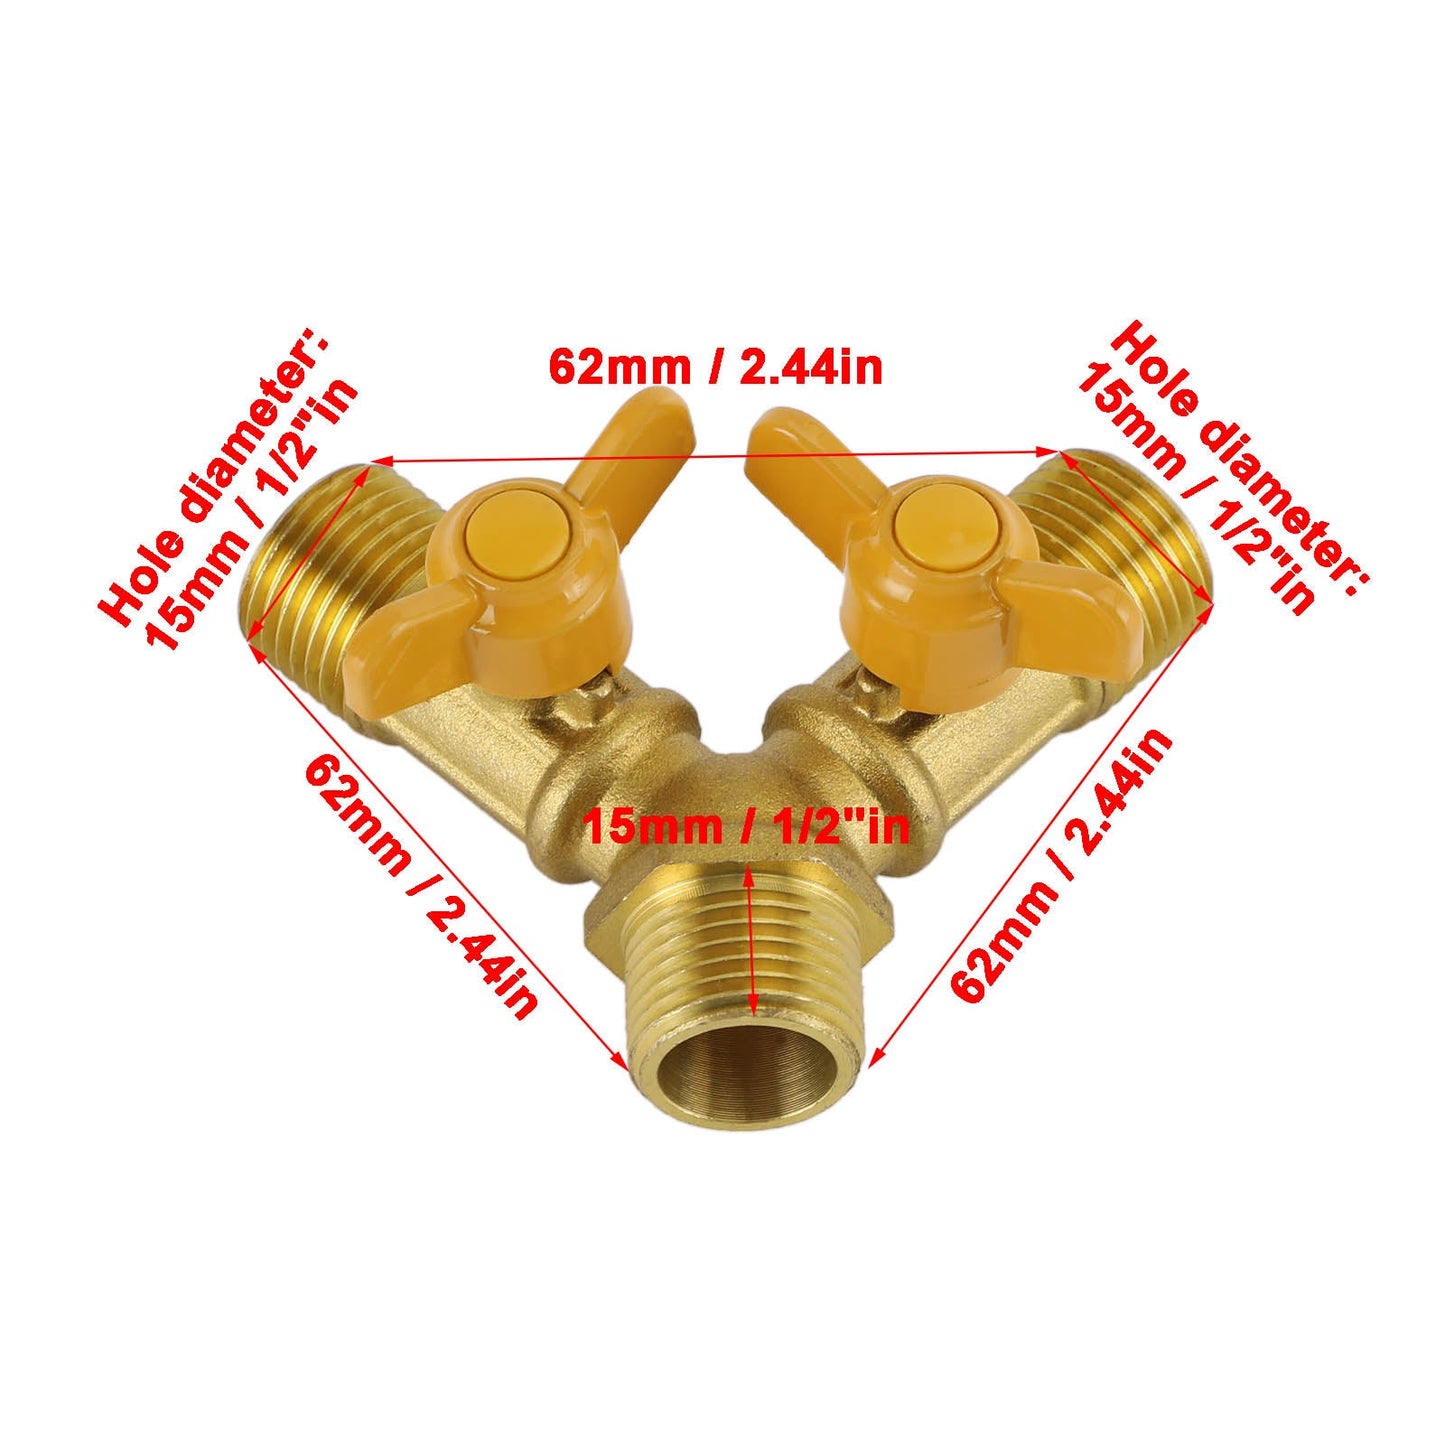 3 Way Shut off Ball Valve 1/2" Hose Barb Y Shaped Valve 2 Switch Brass Fitting